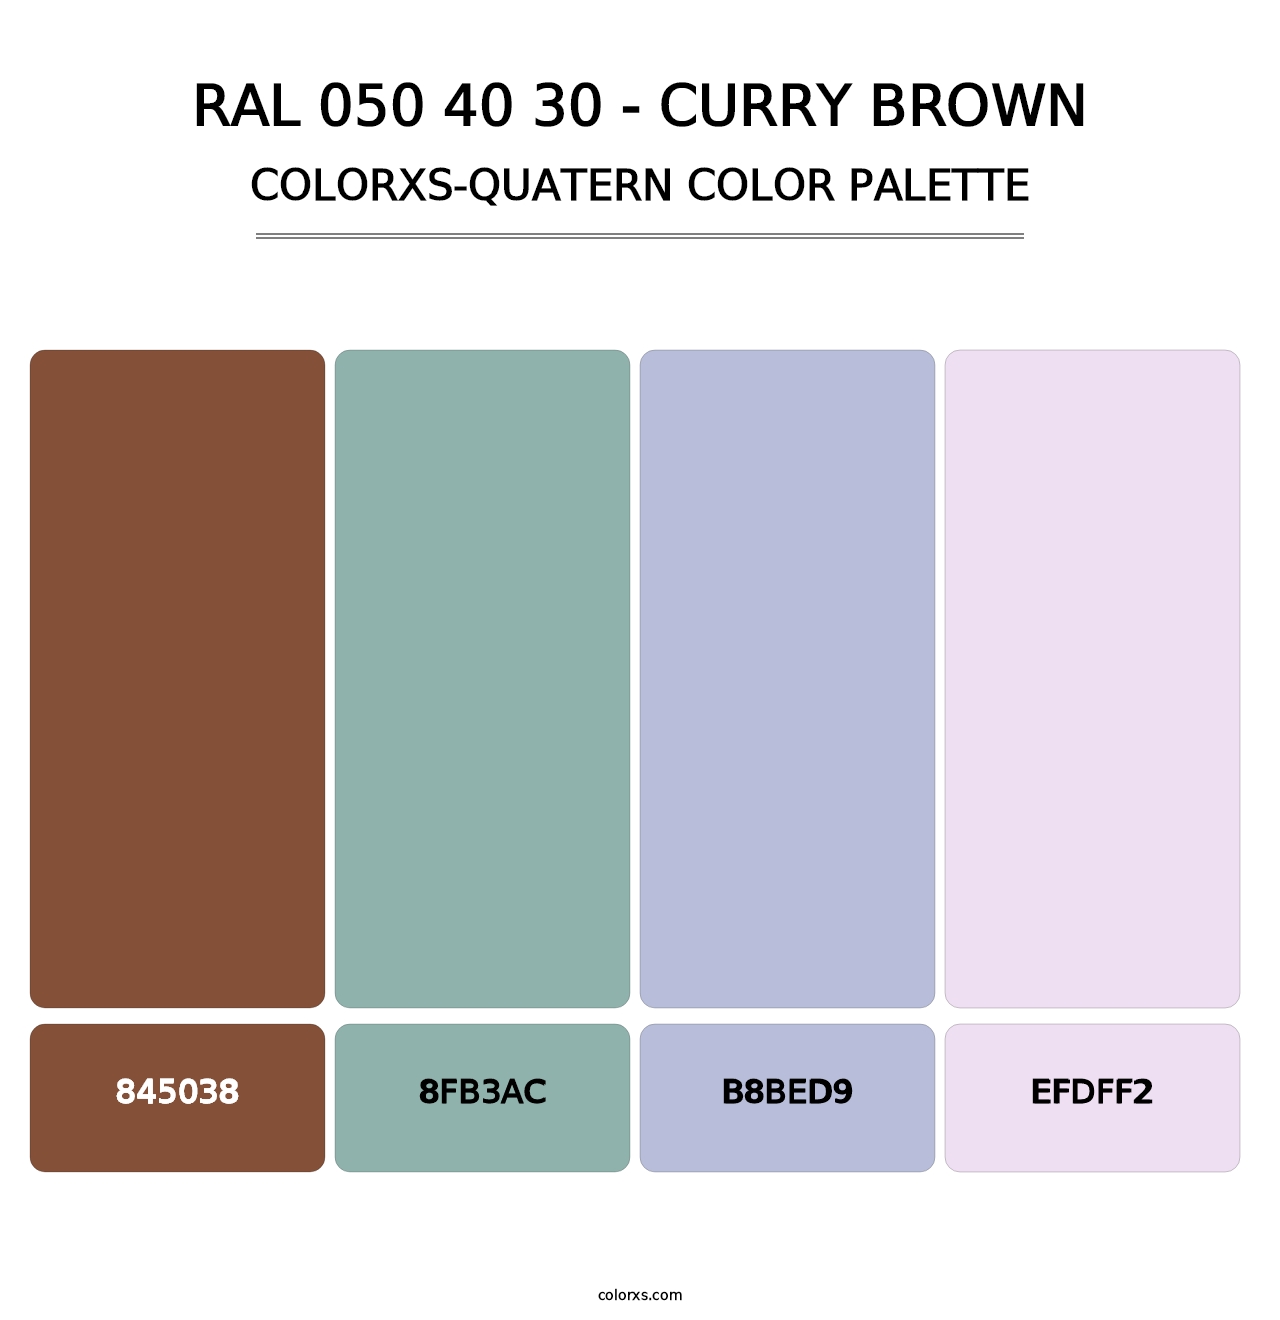 RAL 050 40 30 - Curry Brown - Colorxs Quatern Palette